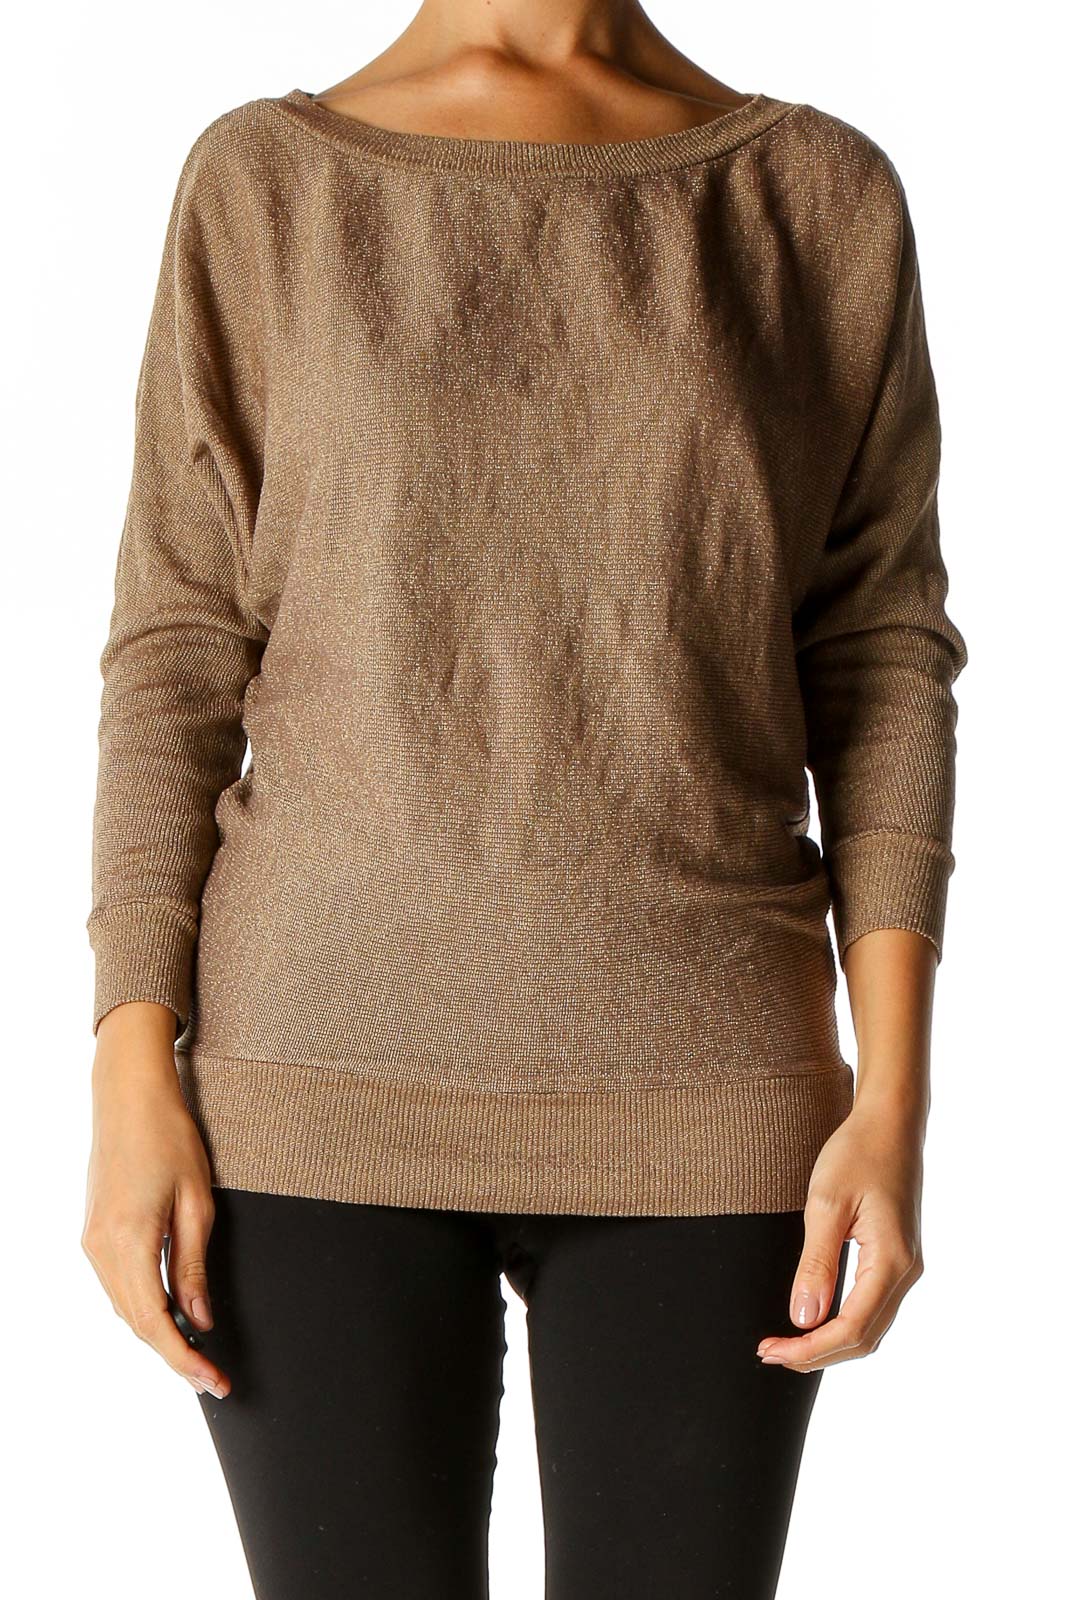 Brown Textured Casual Sweater Front